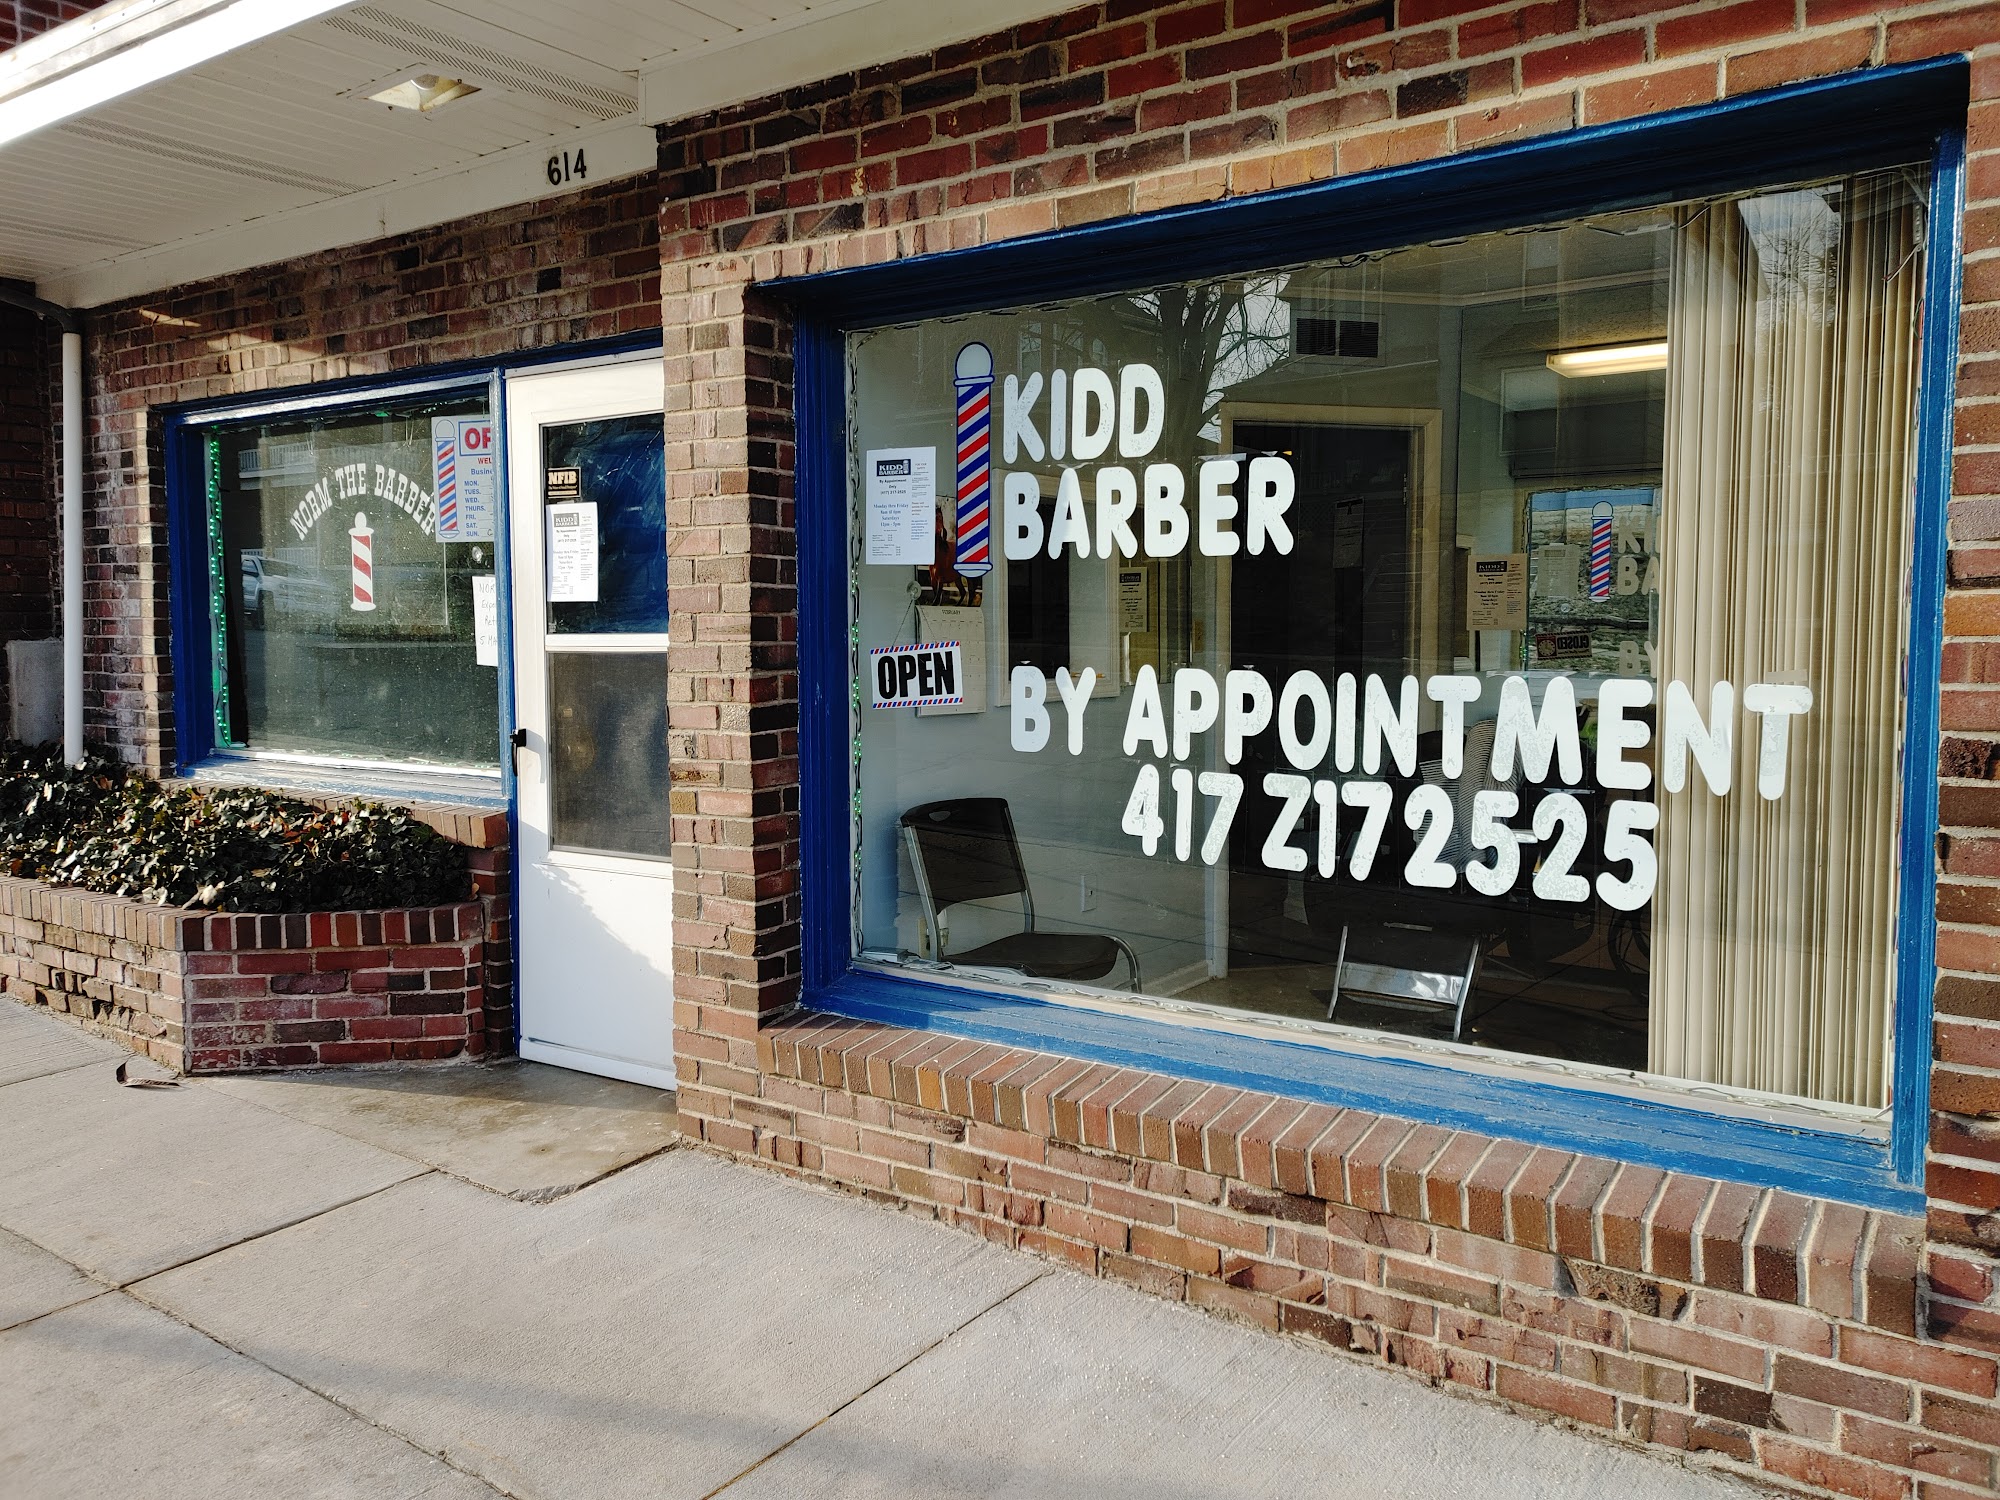 Norm the Barber and Kidd Barber